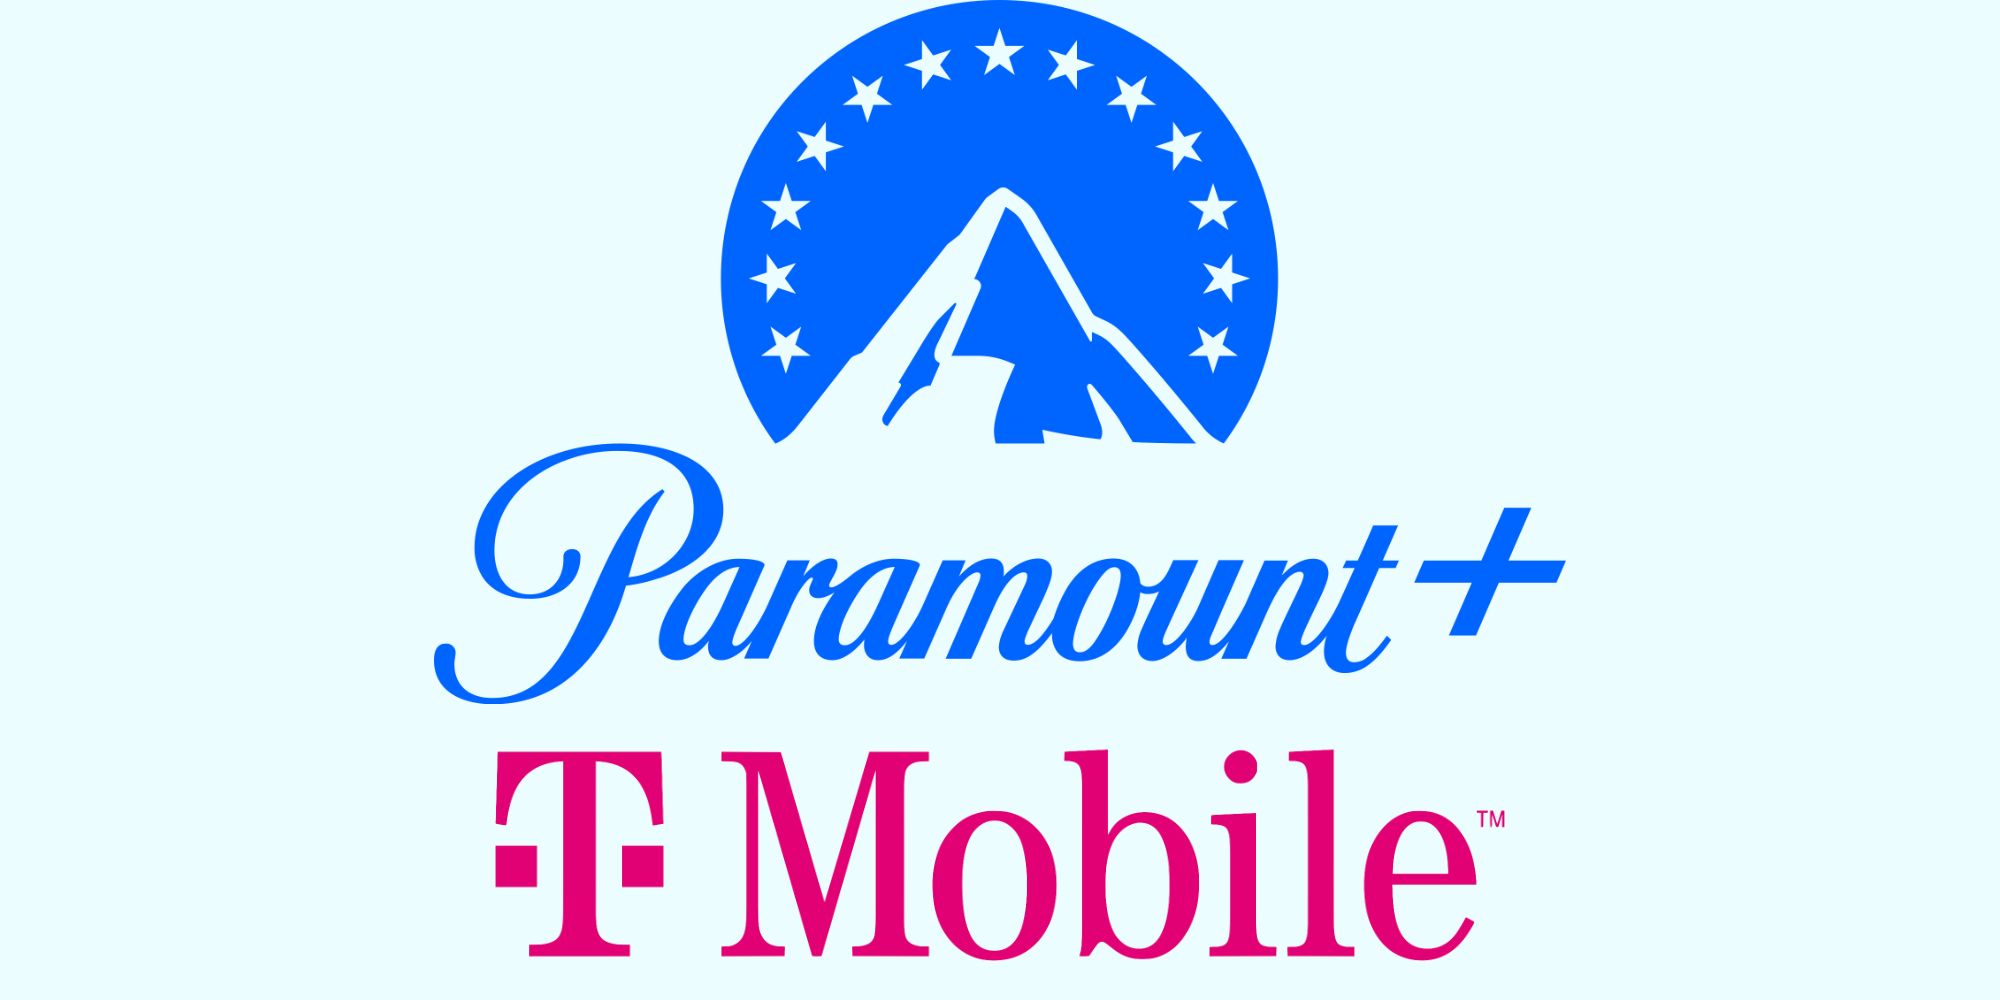 Paramount+ and T-Mobile logos